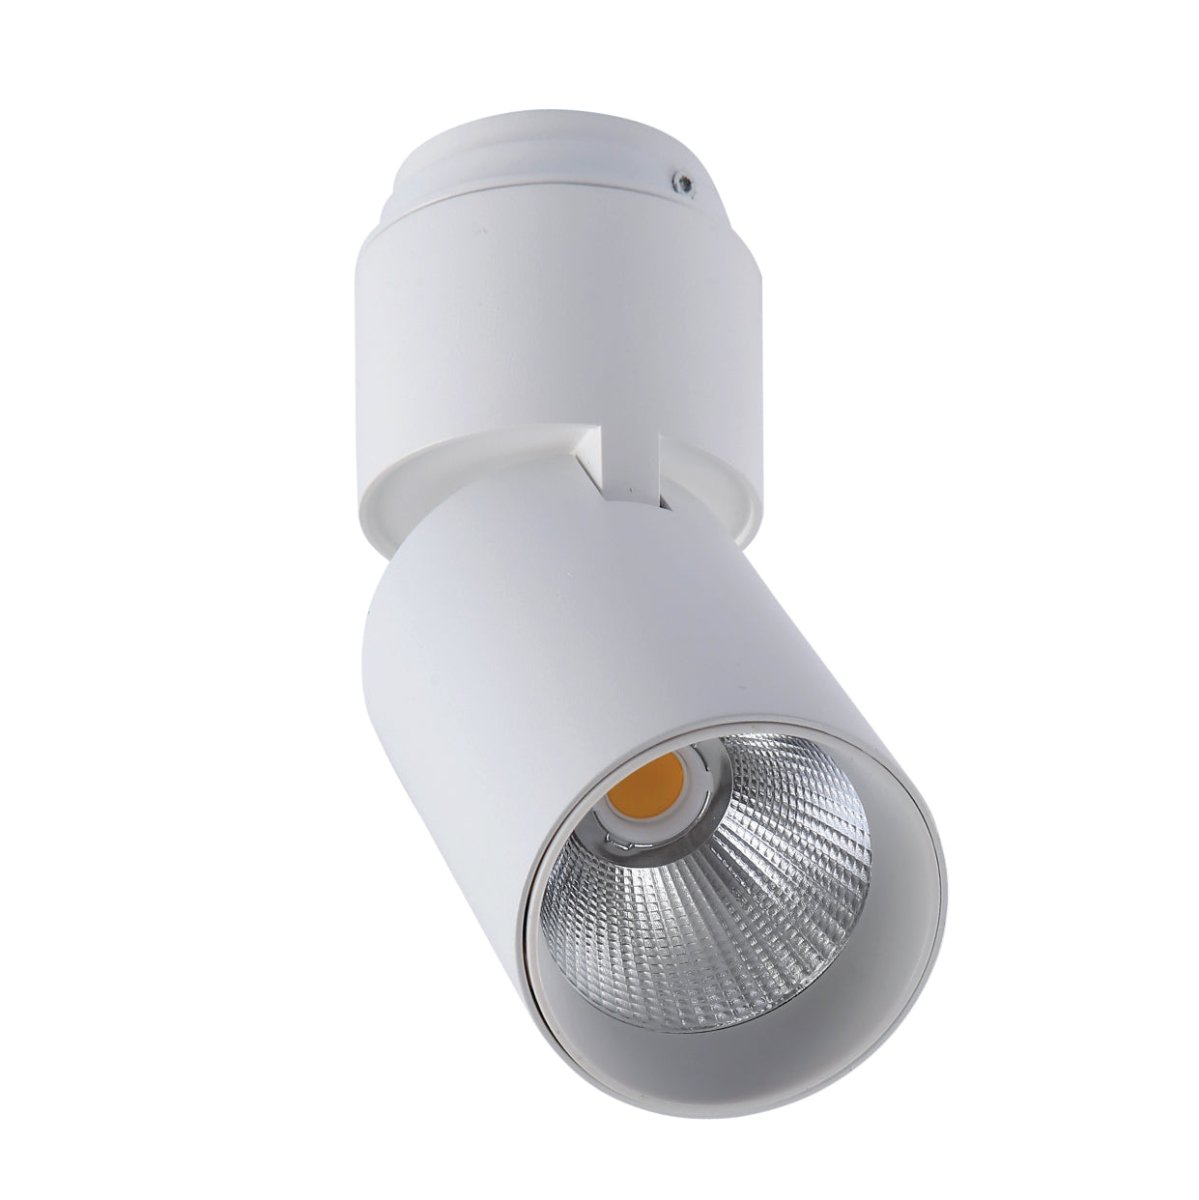 Main image of LED Surface-Recesssed Rotatable Downlight H-160 20W Cool White 4000K White | TEKLED 174-03847